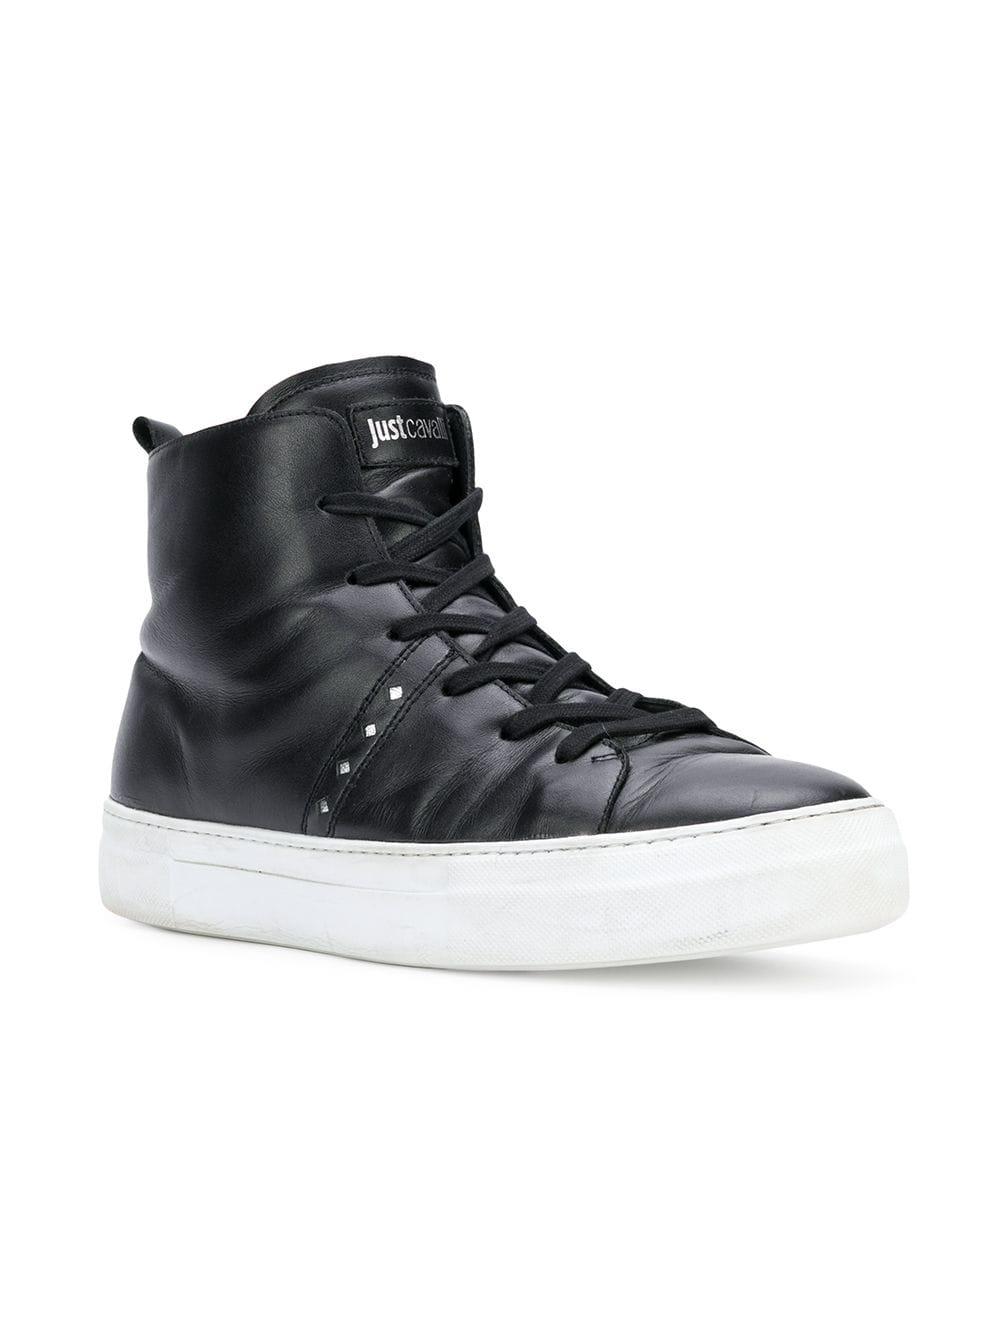 Just Cavalli Leather Studded Hi-top Sneakers in Black for Men - Lyst